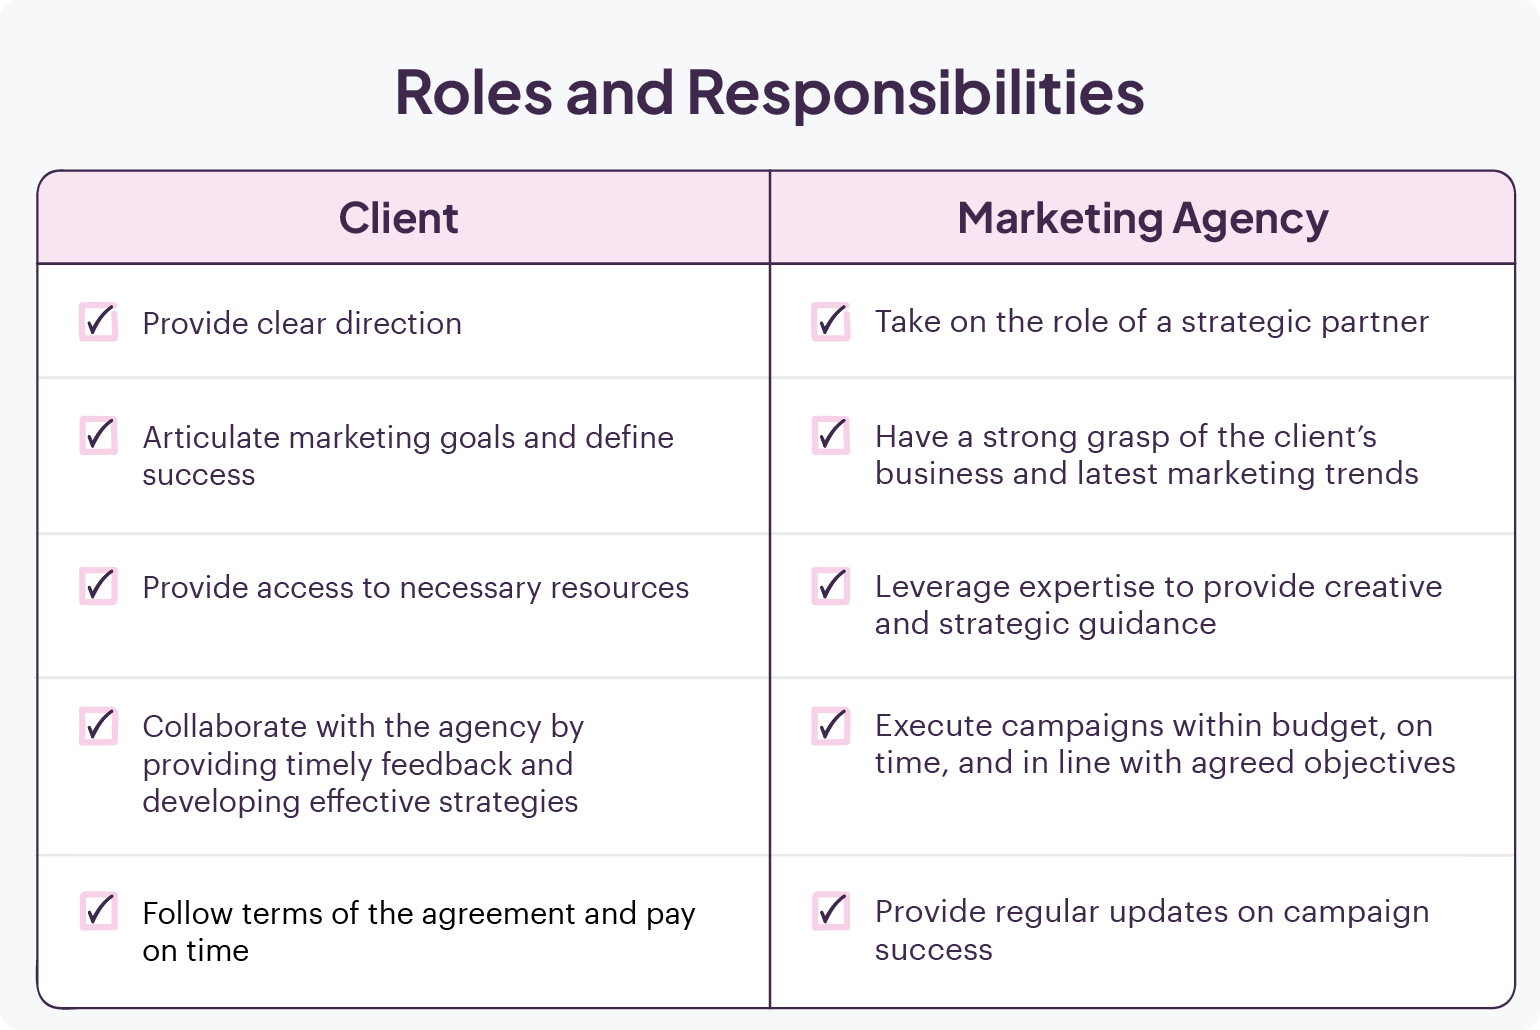 an infographic showing differences between client's and marketing agency's roles